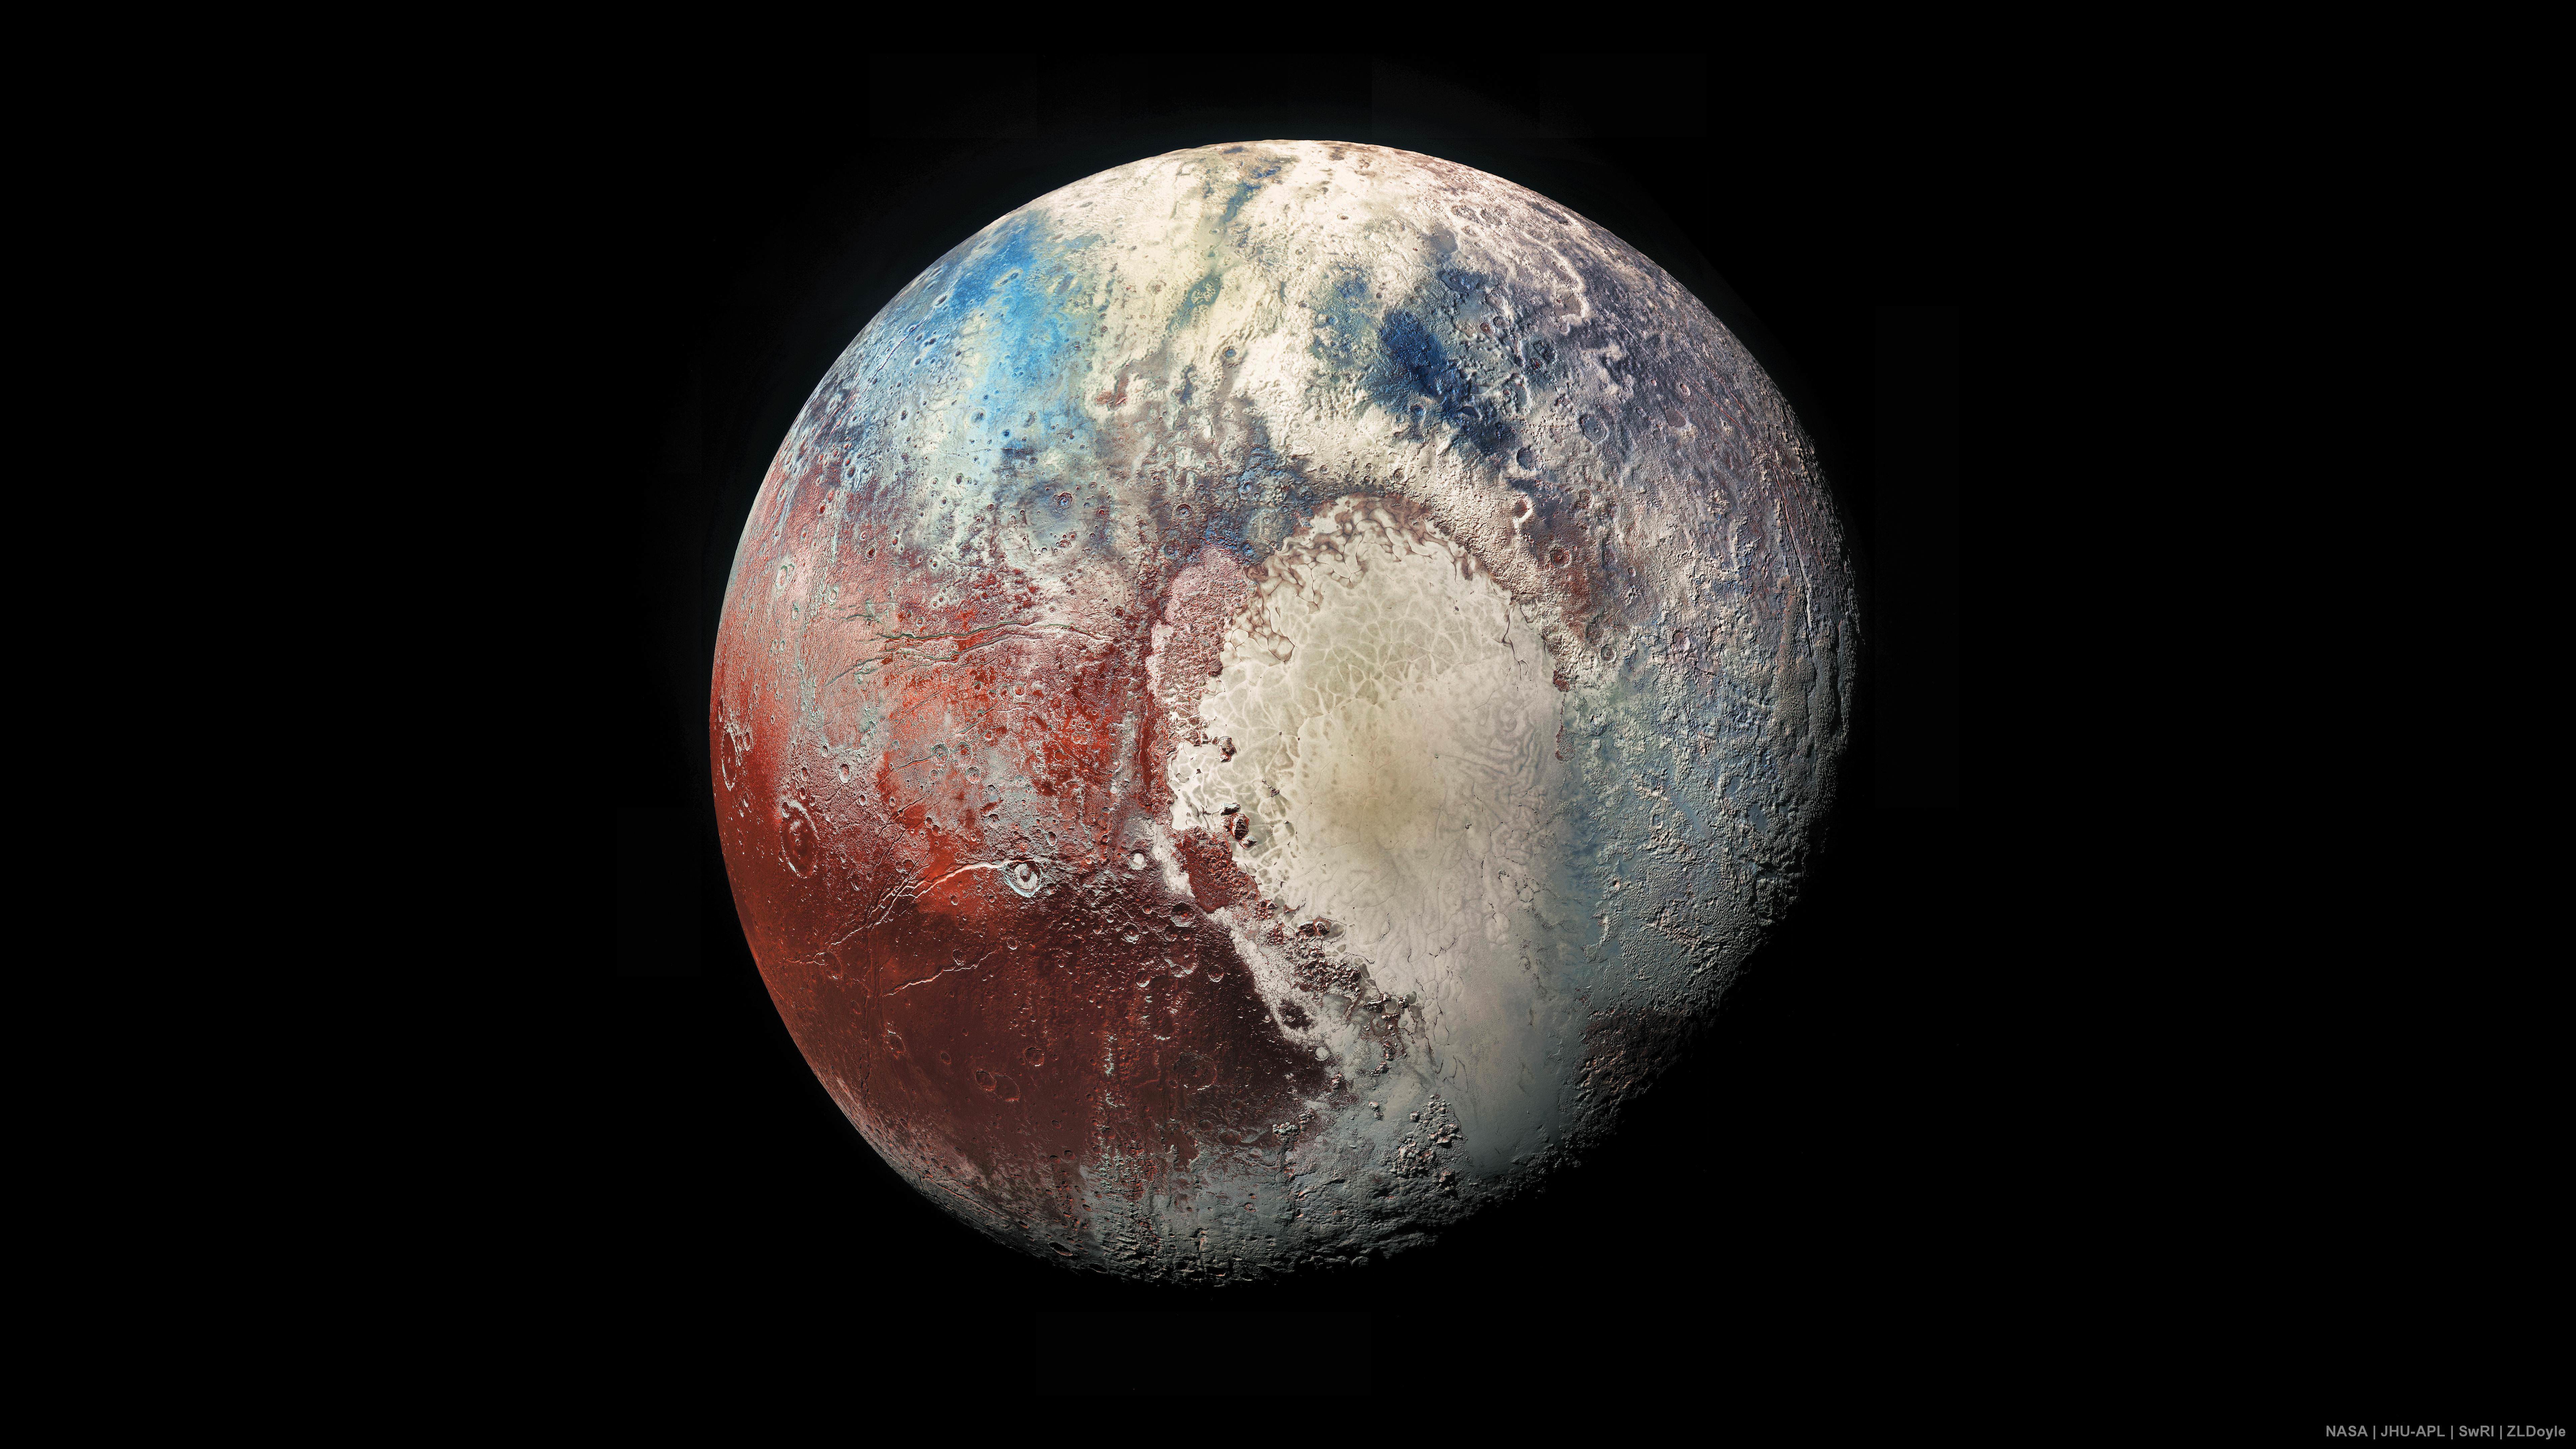 I turned the Pluto image into an 8K wallpaper for those that want it